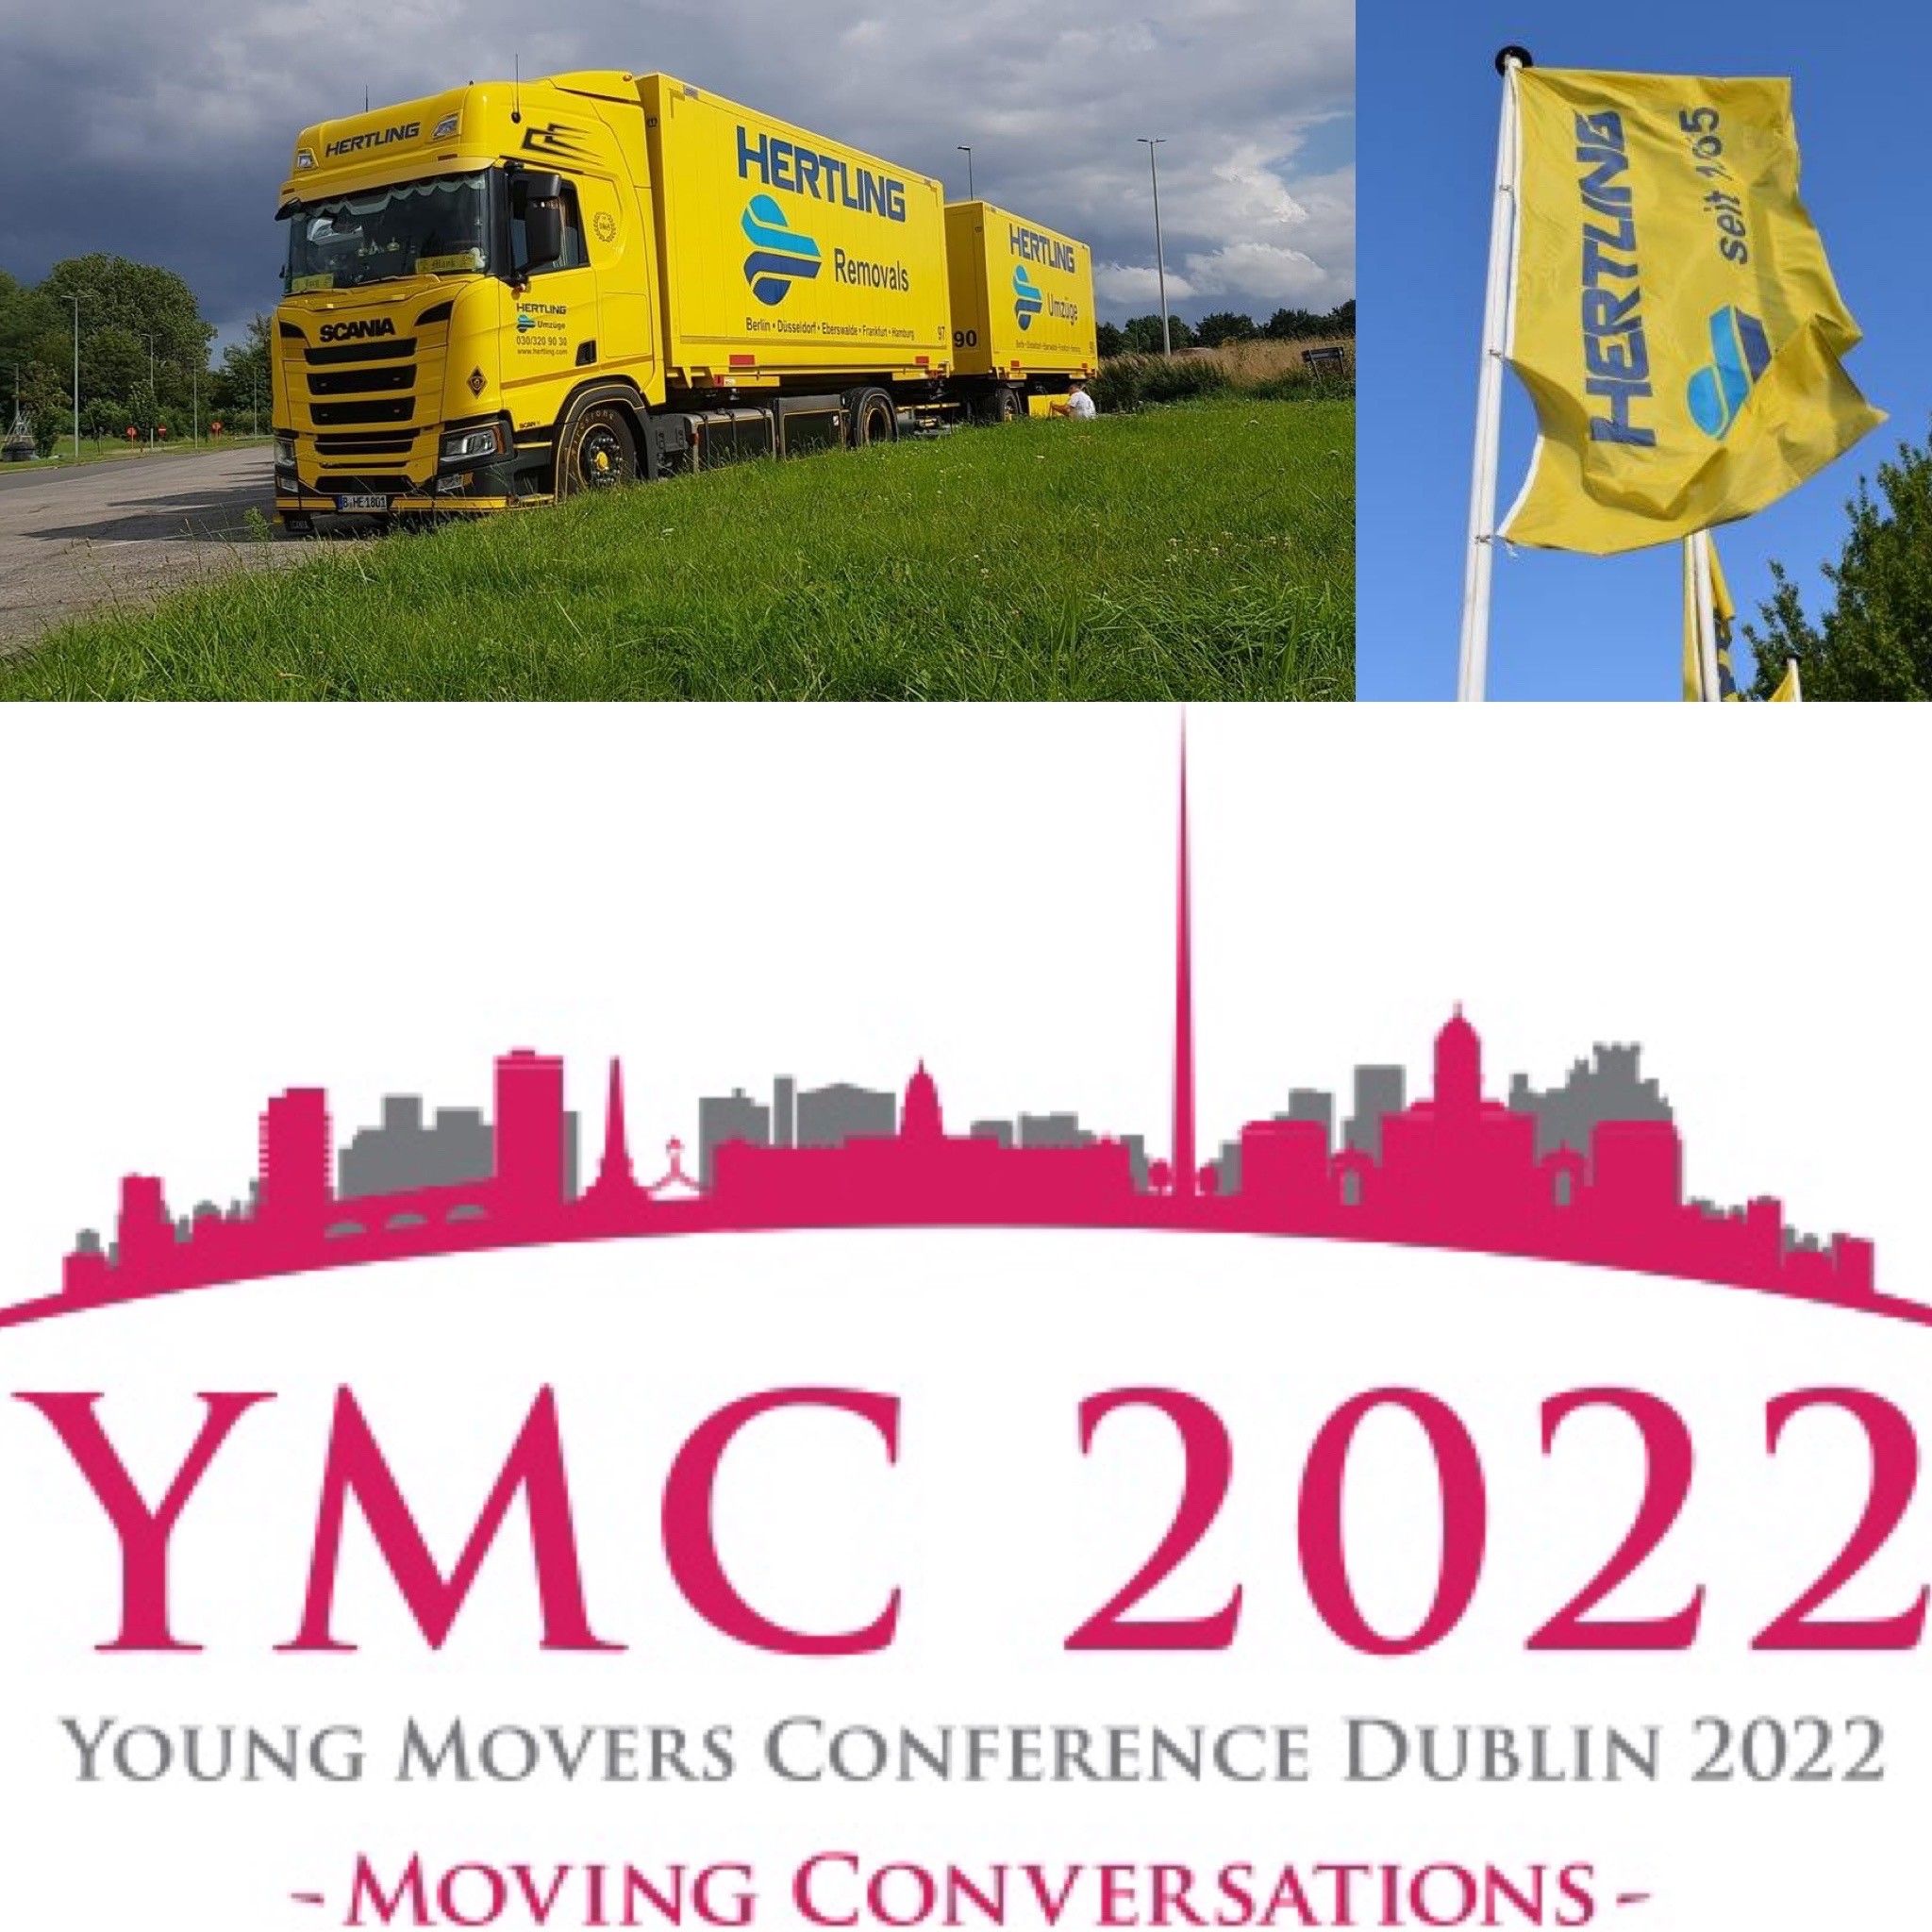 Die Young Movers Conference (YMC) 